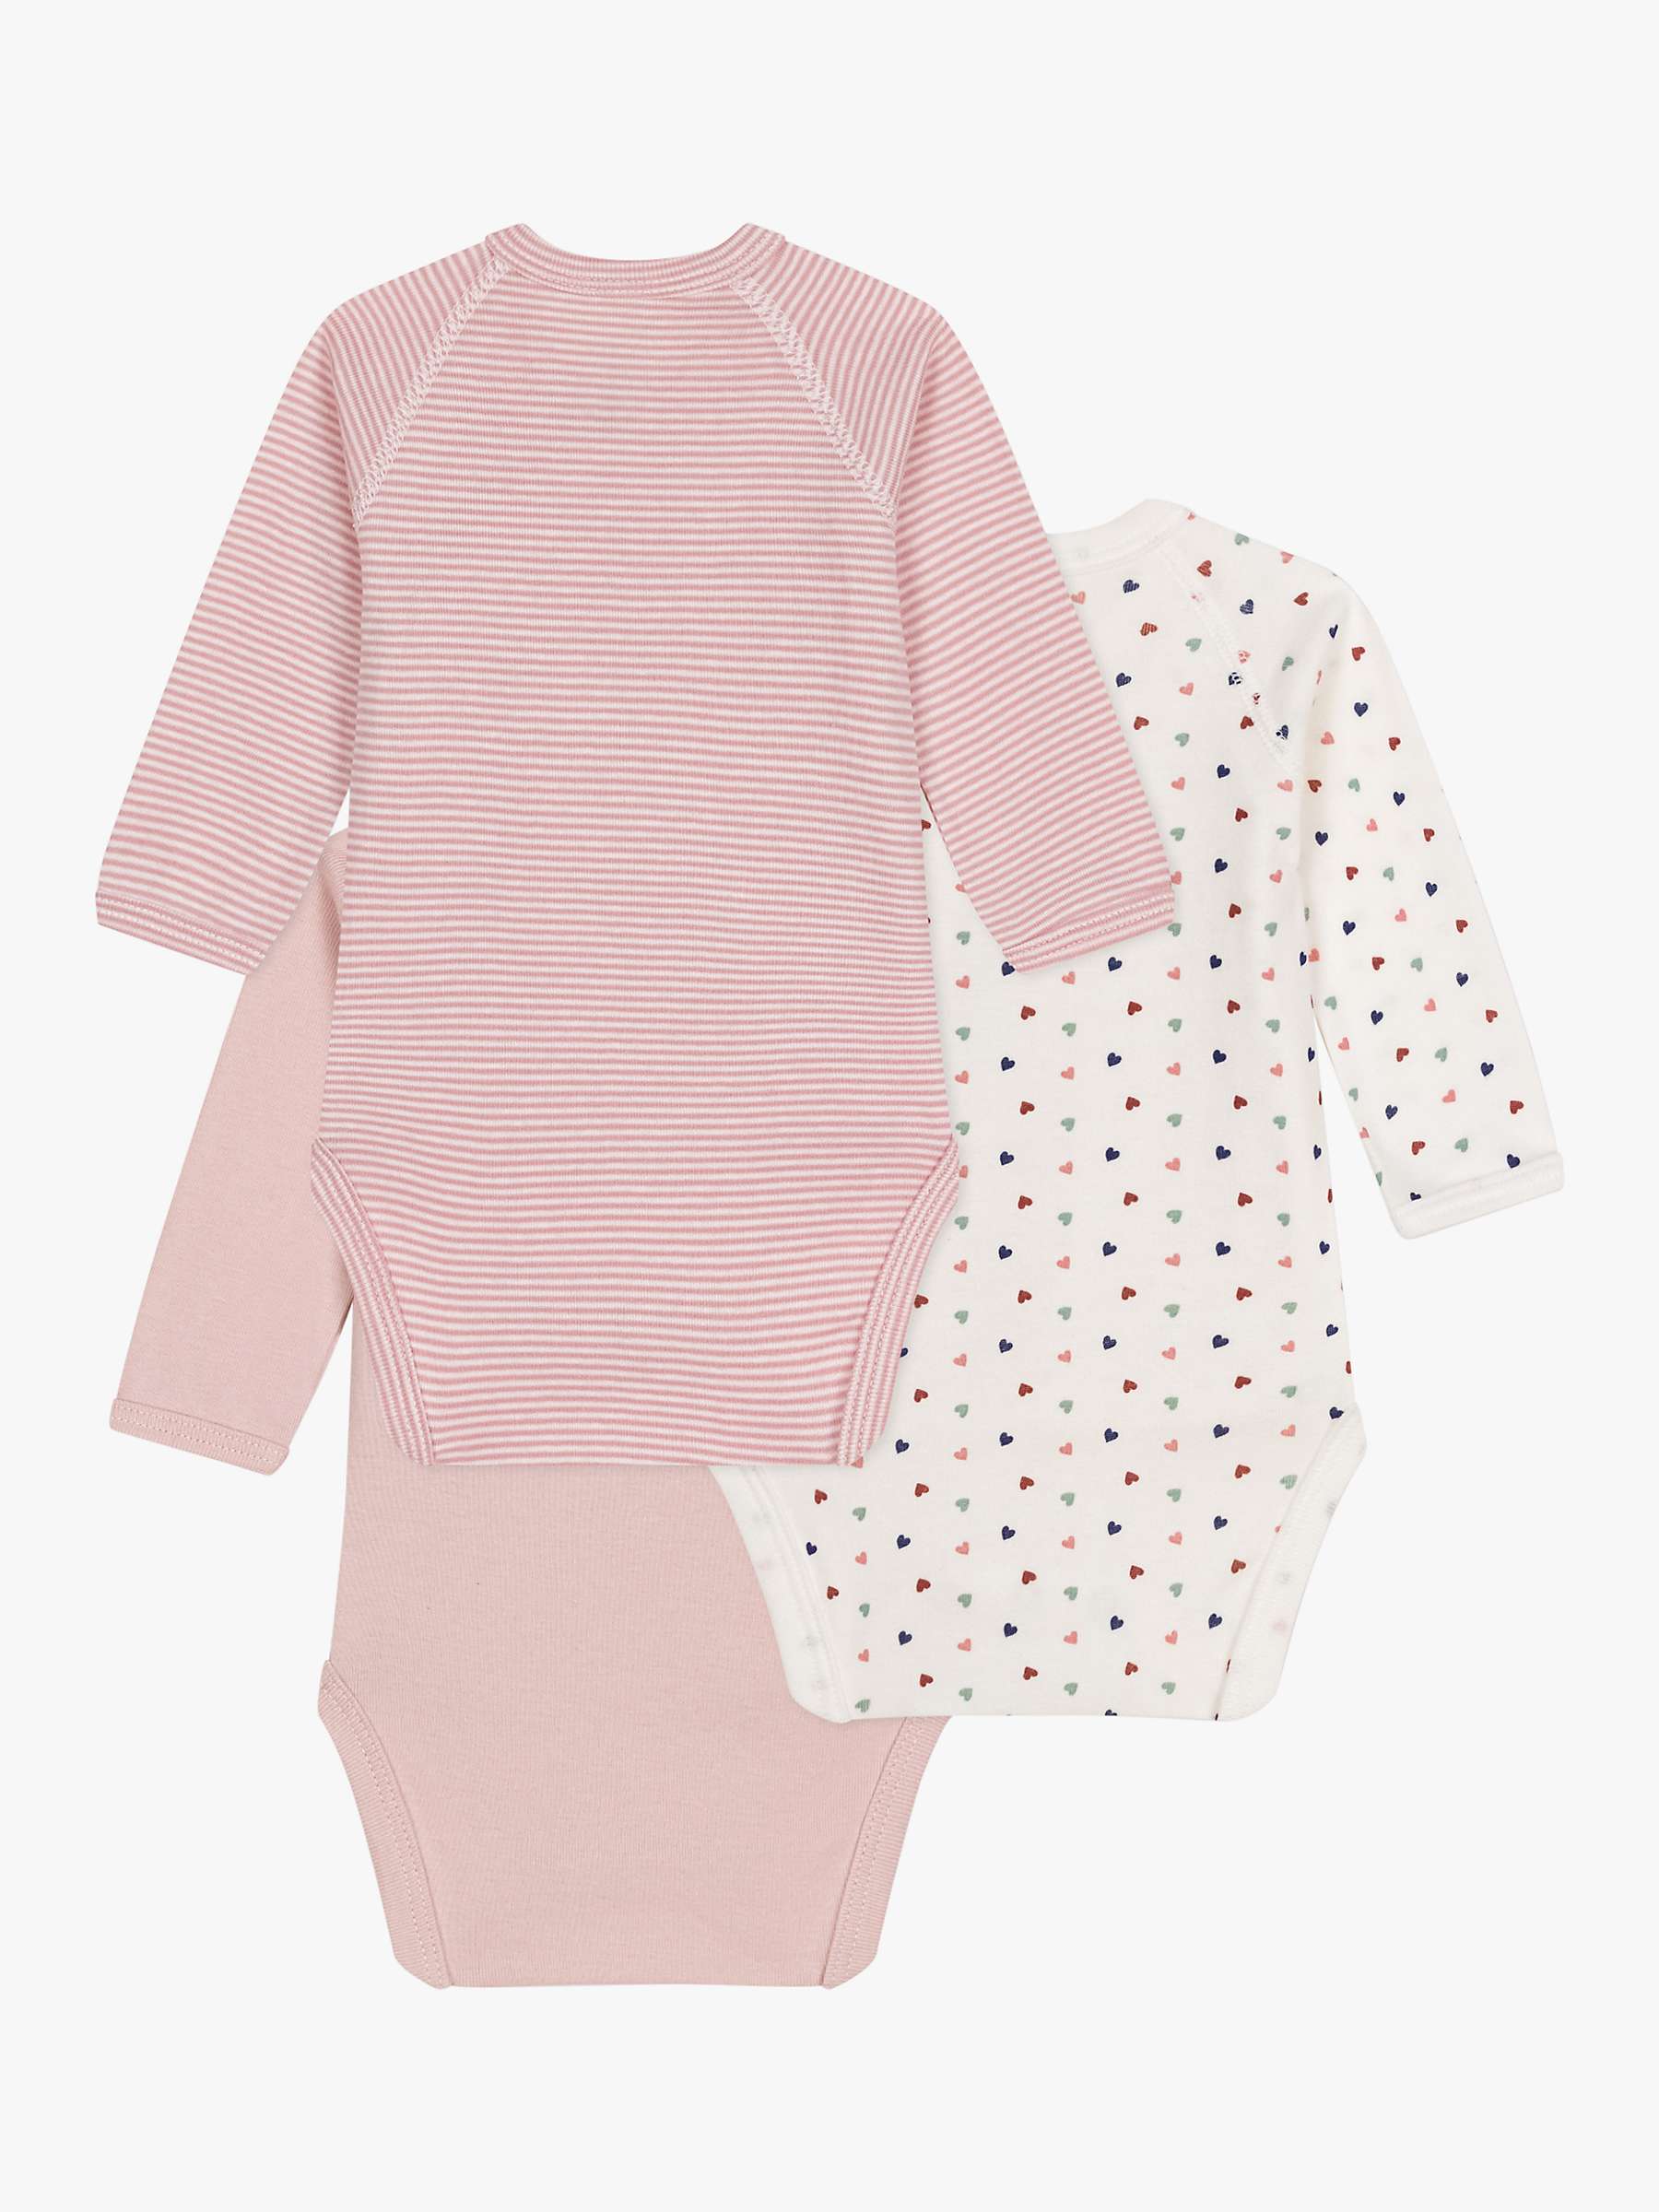 Buy Petit Bateau Baby Heart/Stripe Cotton Wrapover Bodysuits, Pack Of 3, Pink/Multi Online at johnlewis.com